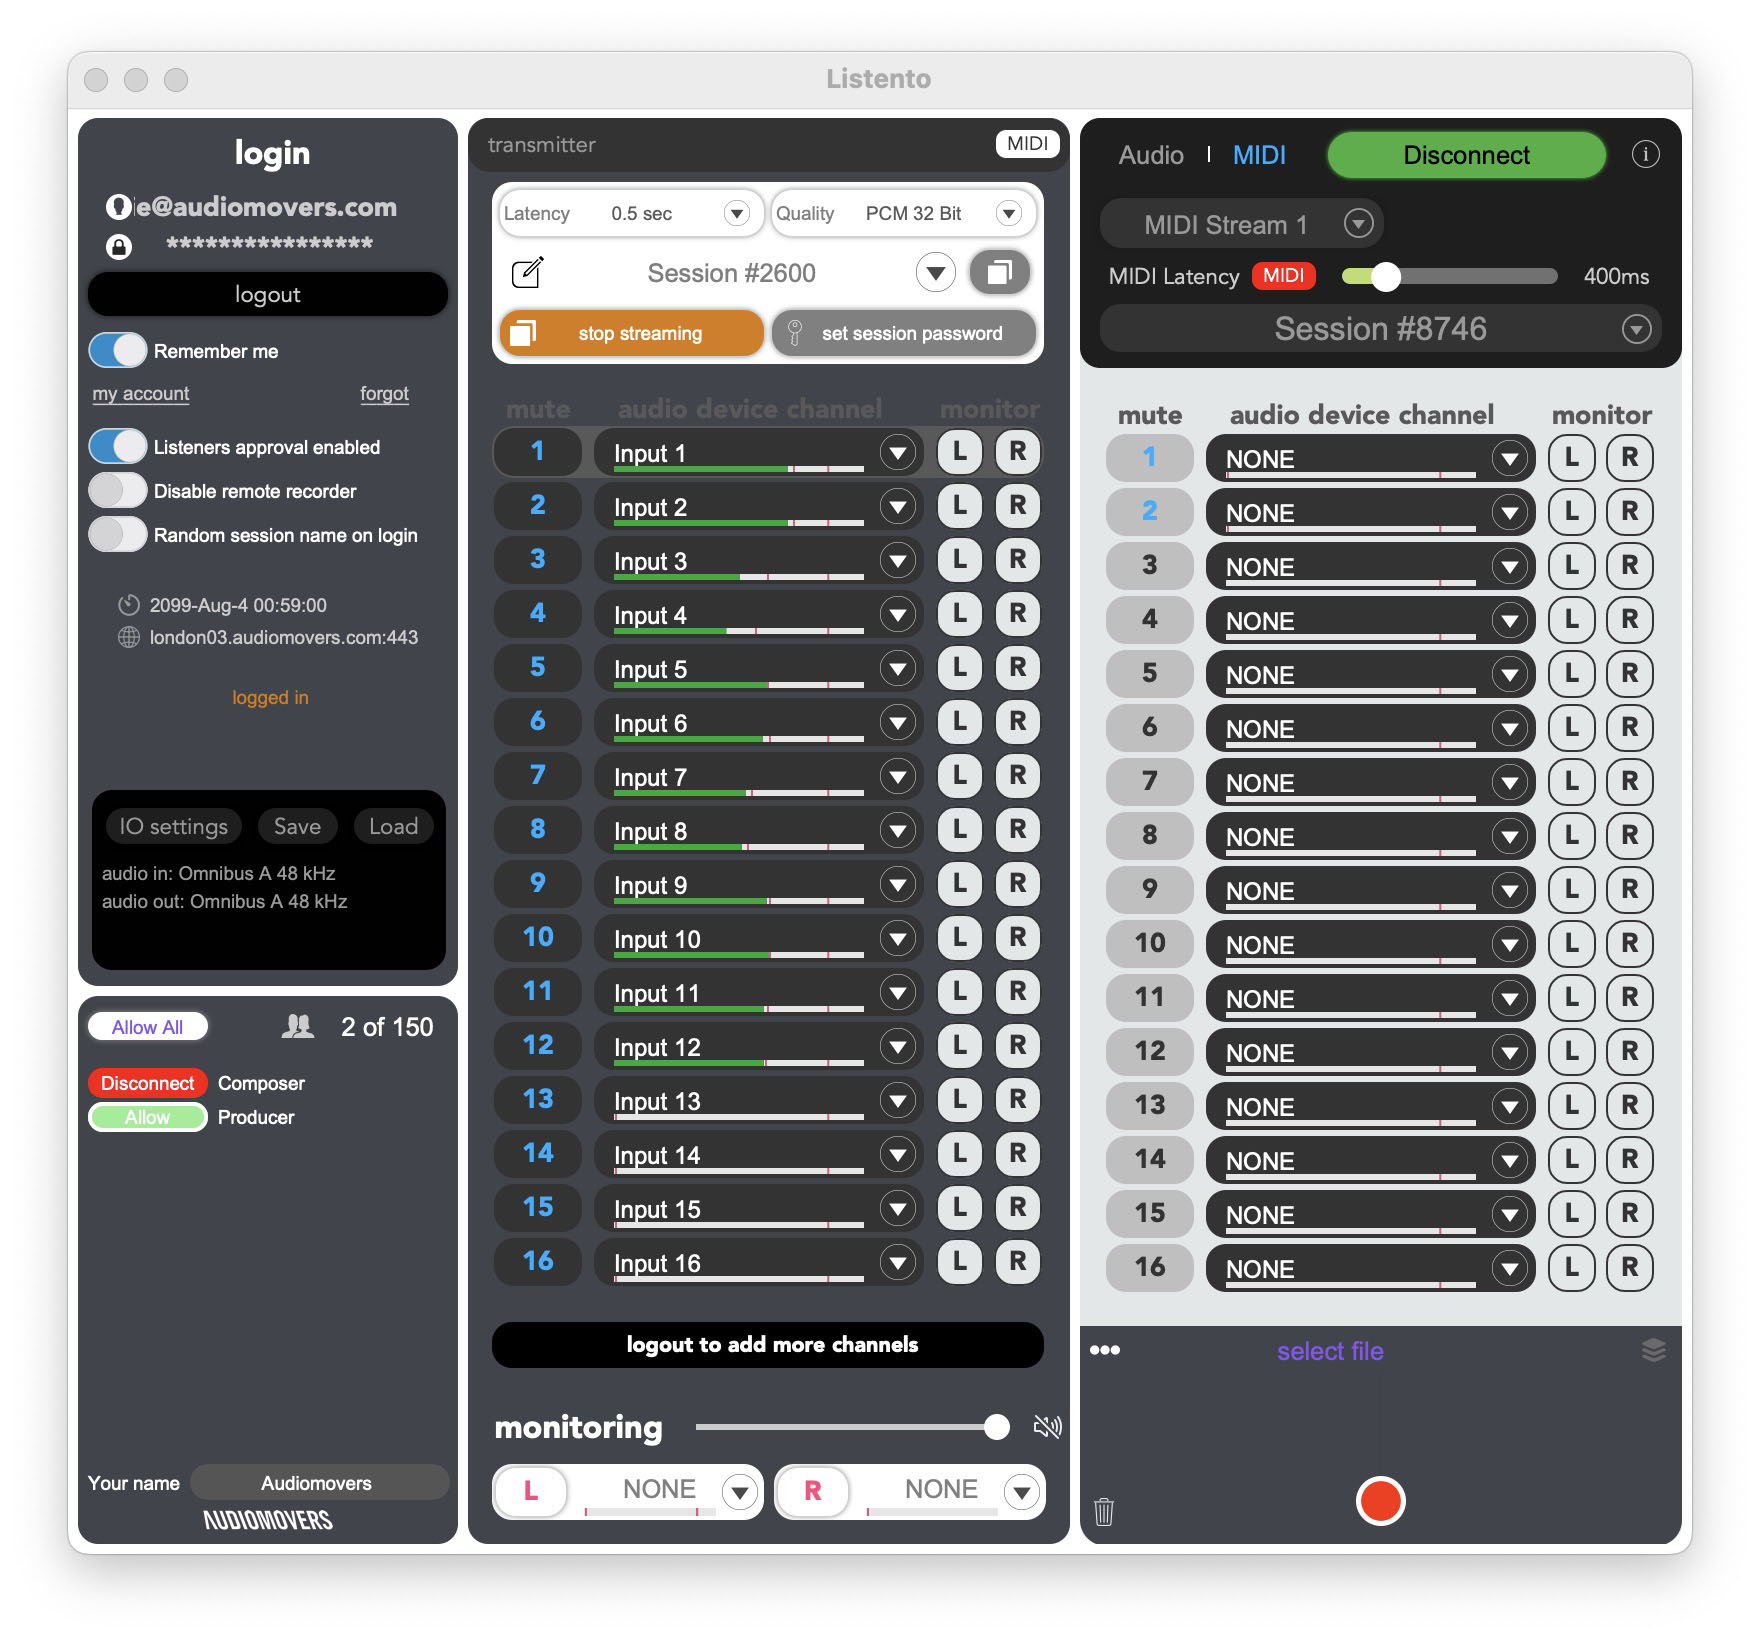 The Audiomovers standalone desktop app now includes MIDI Time Code generation which allows engineers to synchronise remote DAWs with transmitted MTC timecodes generated by LISTENTO streams.